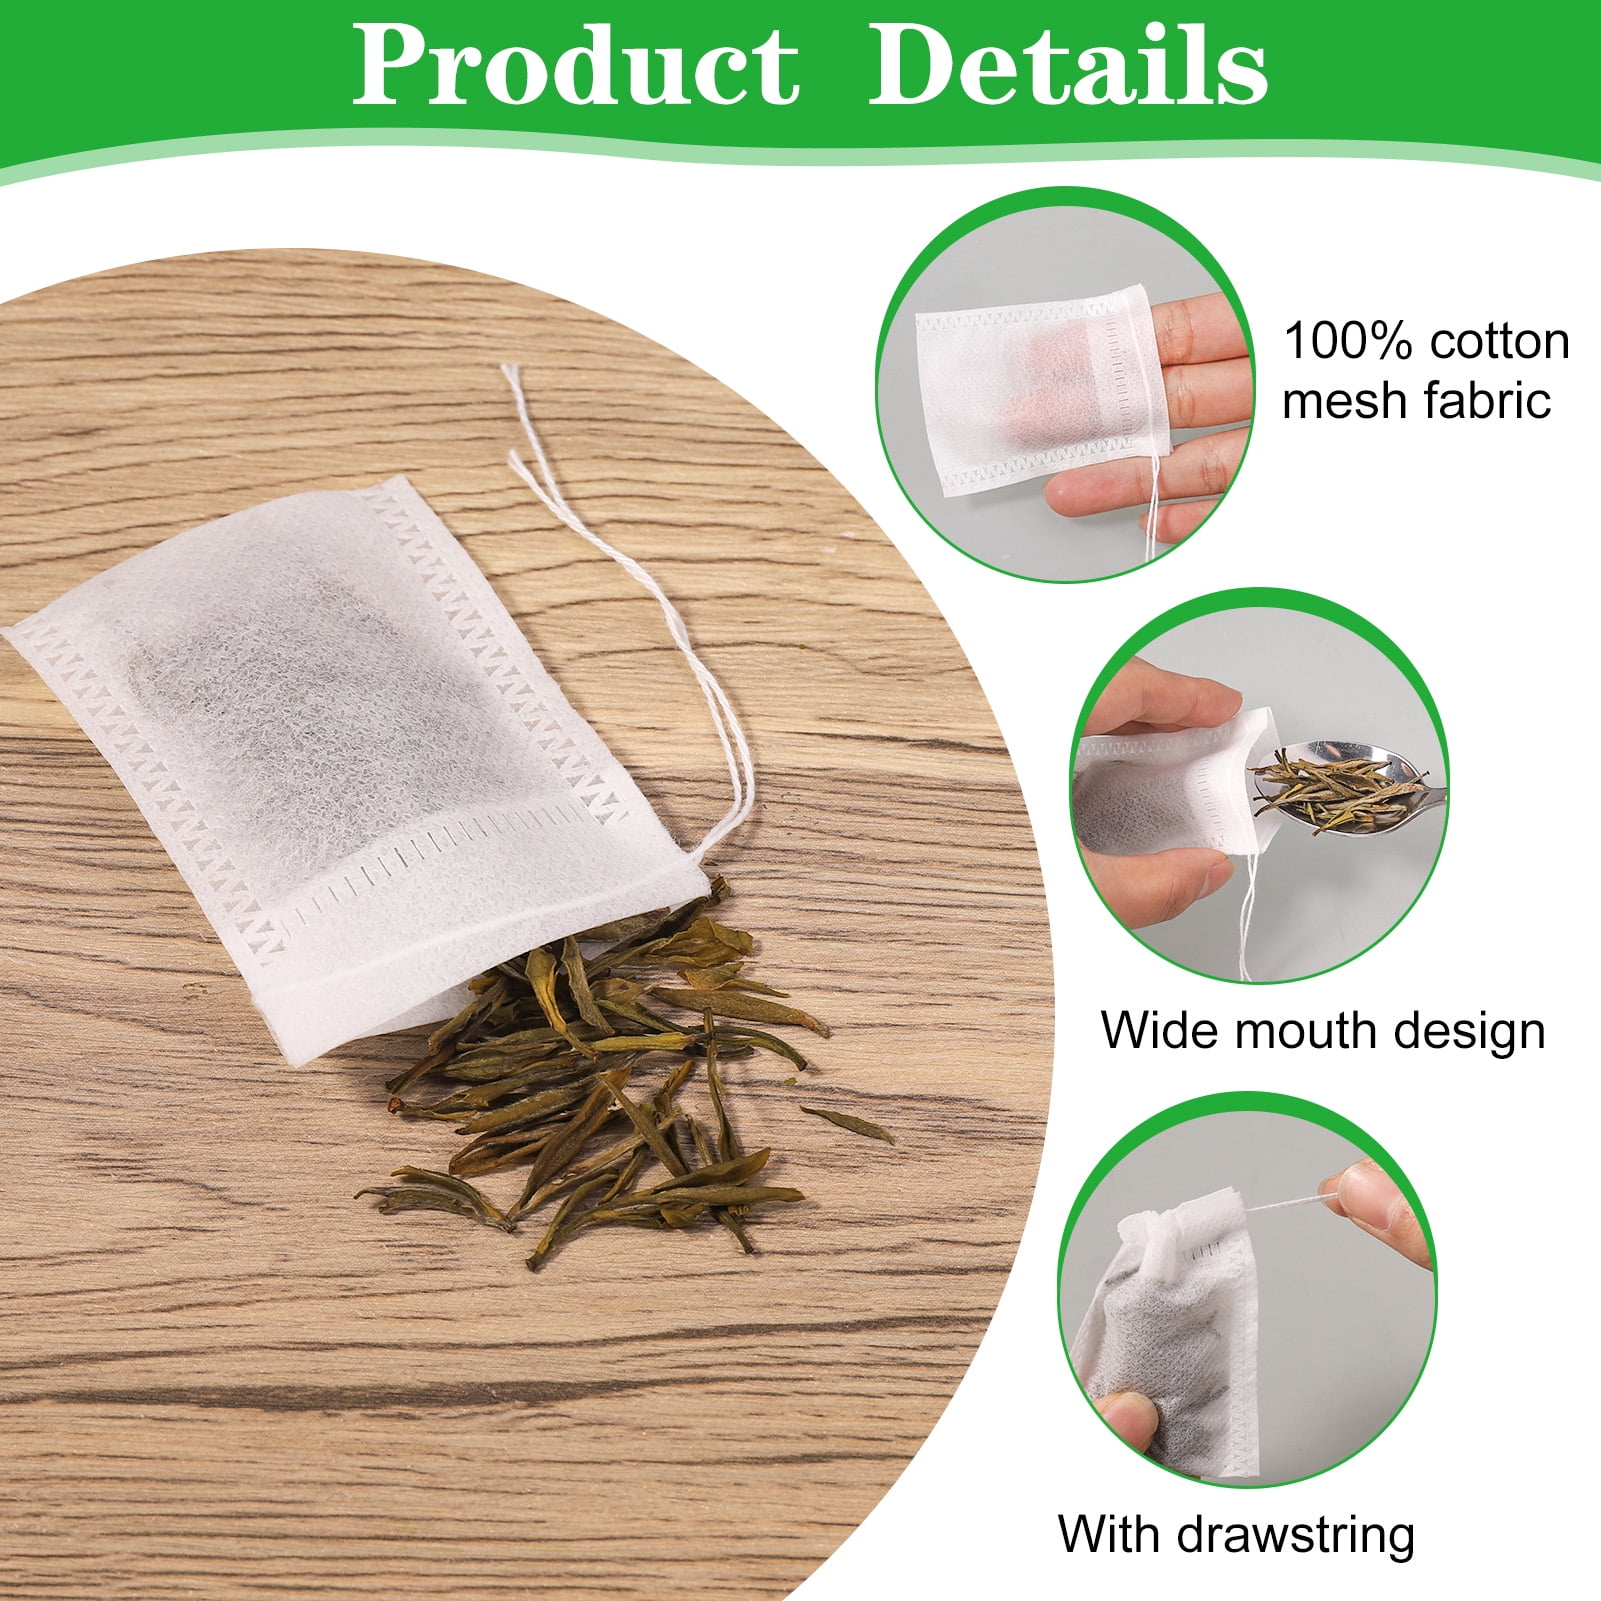 Tea Buddies Loose Tea Filter Bags, All Natural, Disposable Tea Infuser with Drawstring - Fill Your Own Empty Tea Bags, Single Cup Capacity [Bonus] - F